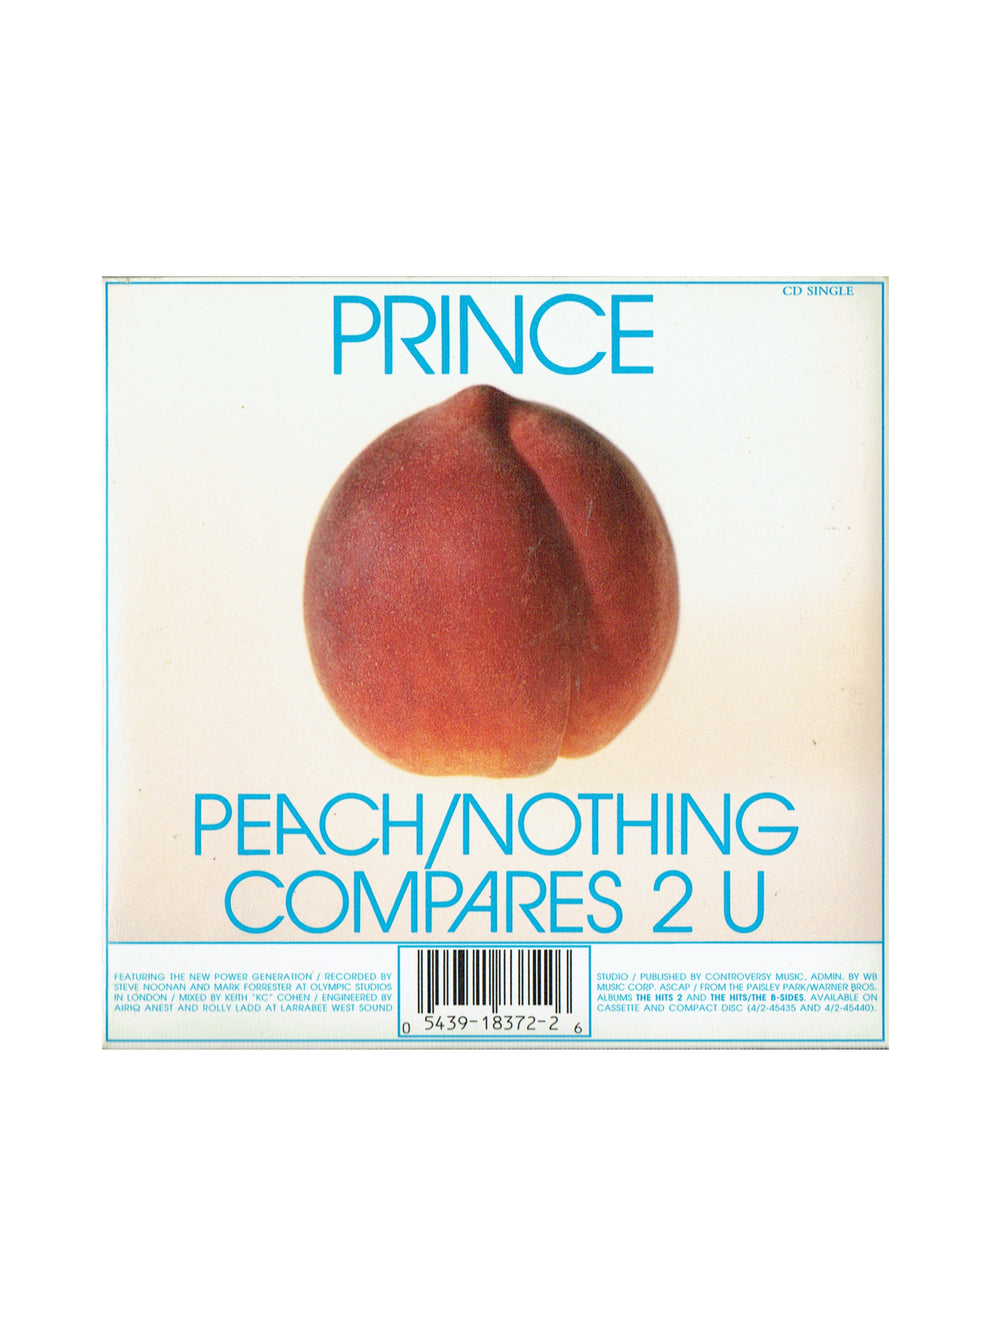 Prince Peach Nothing Compares 2 U CD Single 1993 USA Release